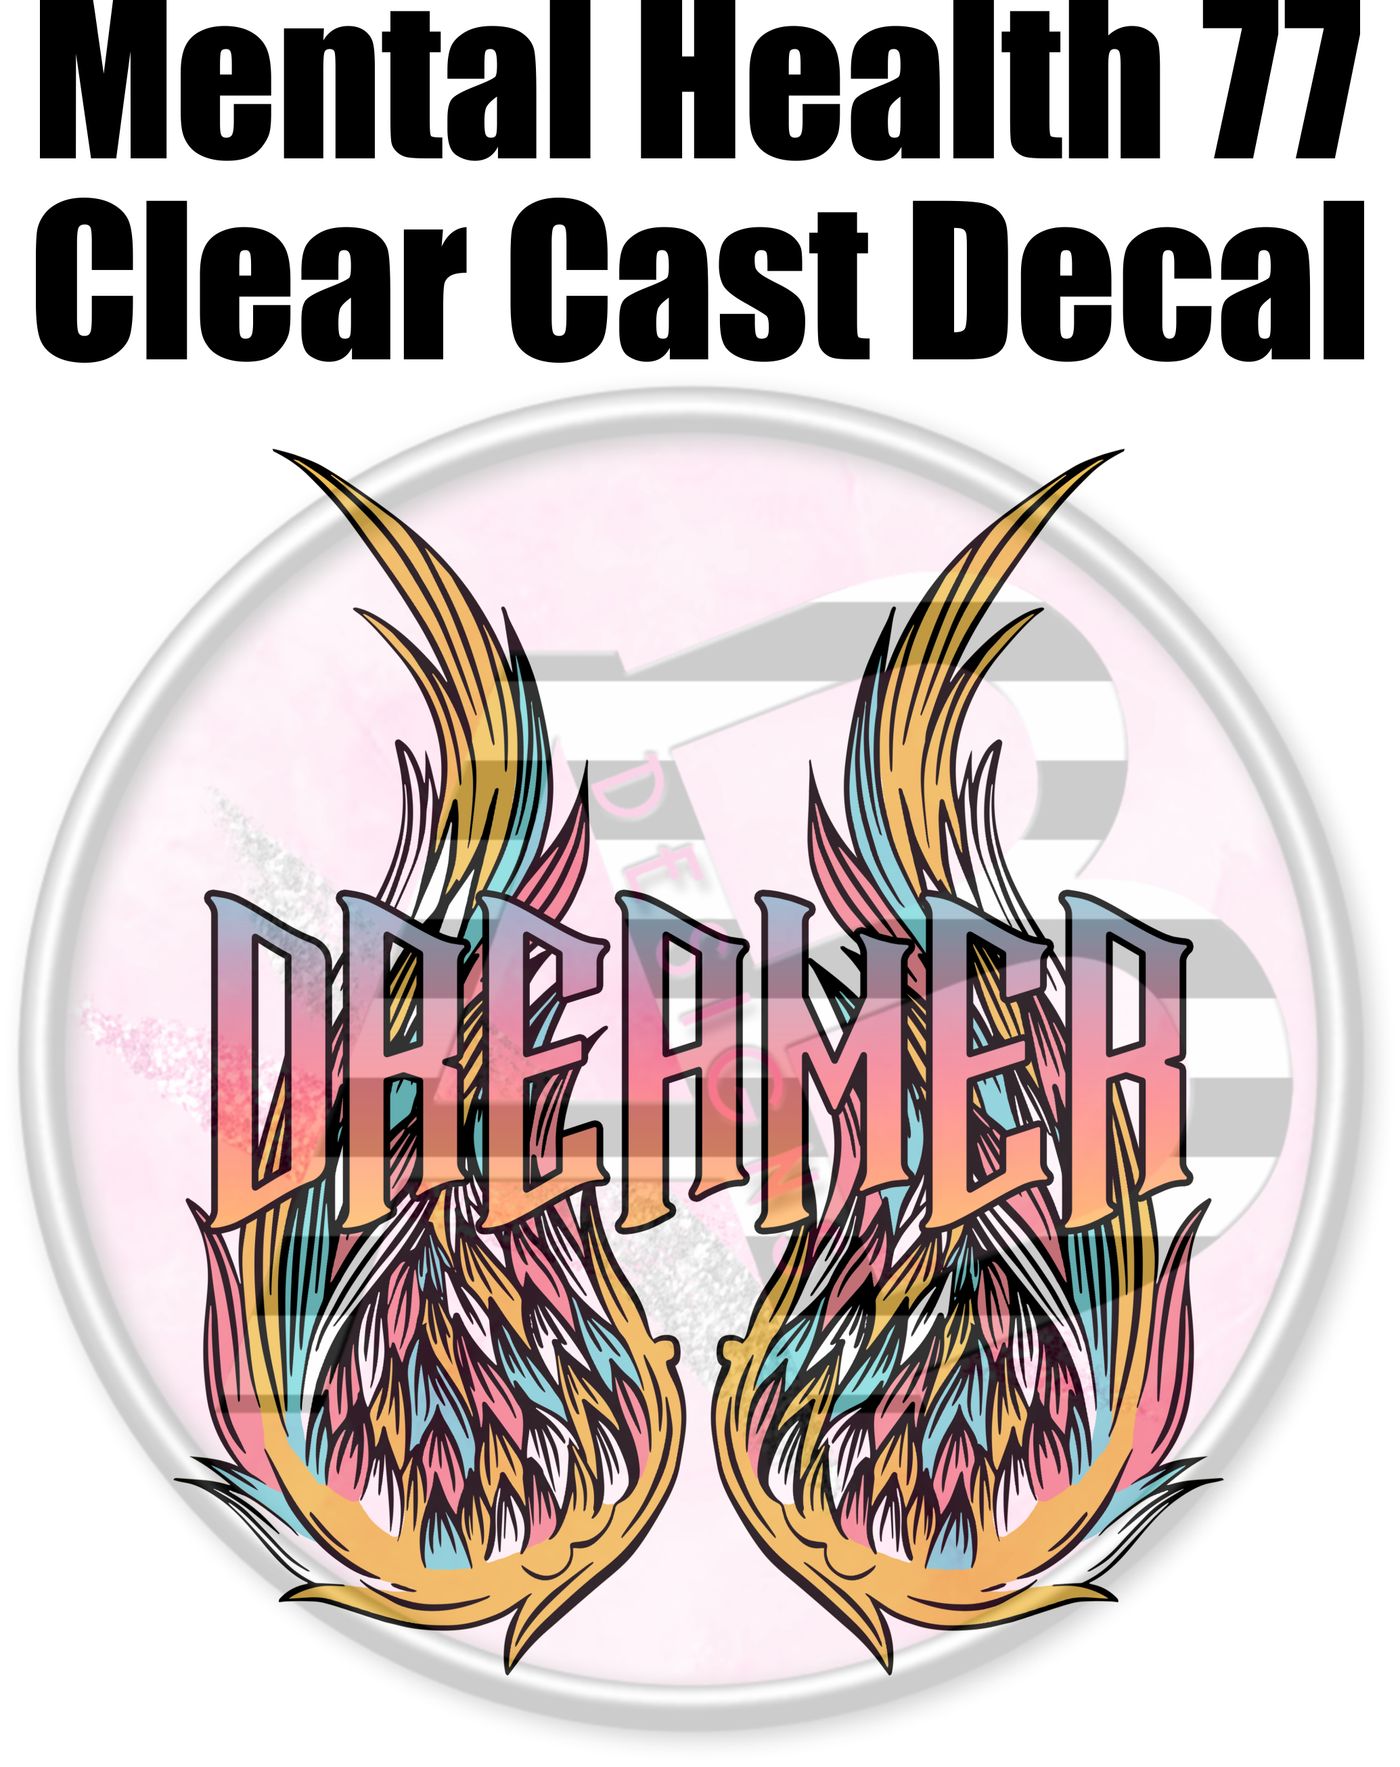 Mental Health 77 - Clear Cast Decal-461